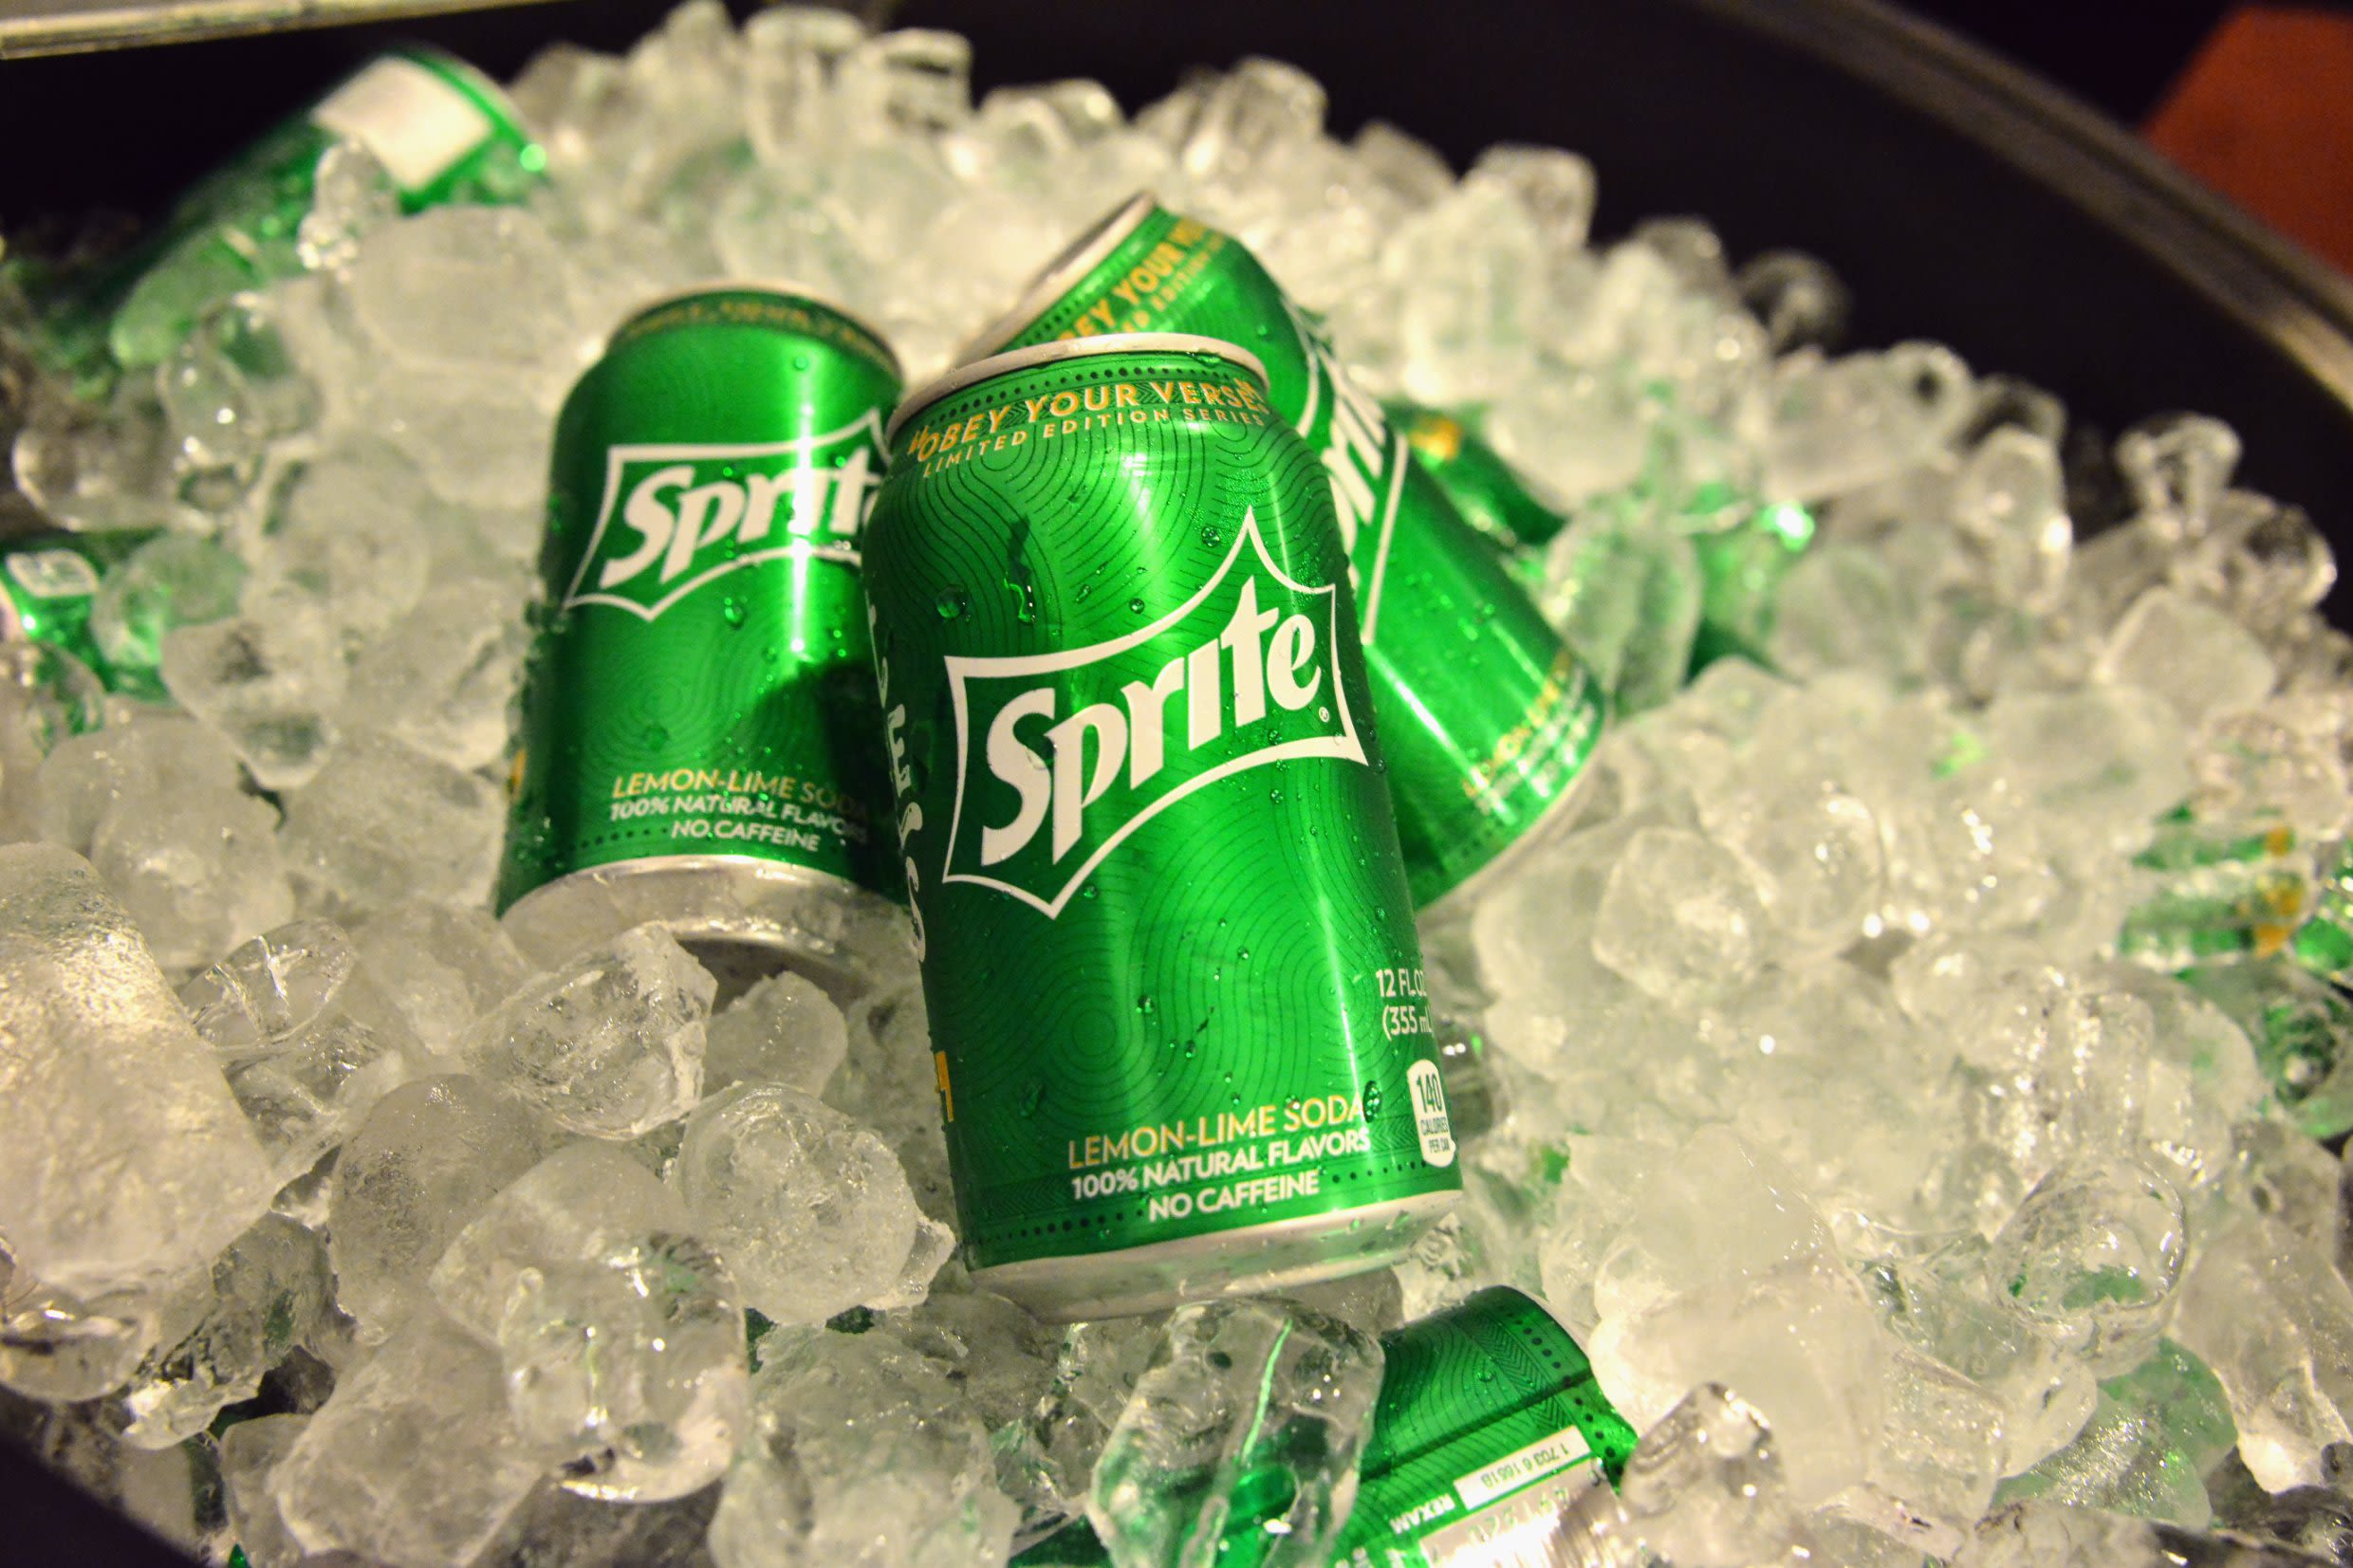 What Alcohol Goes with Sprite